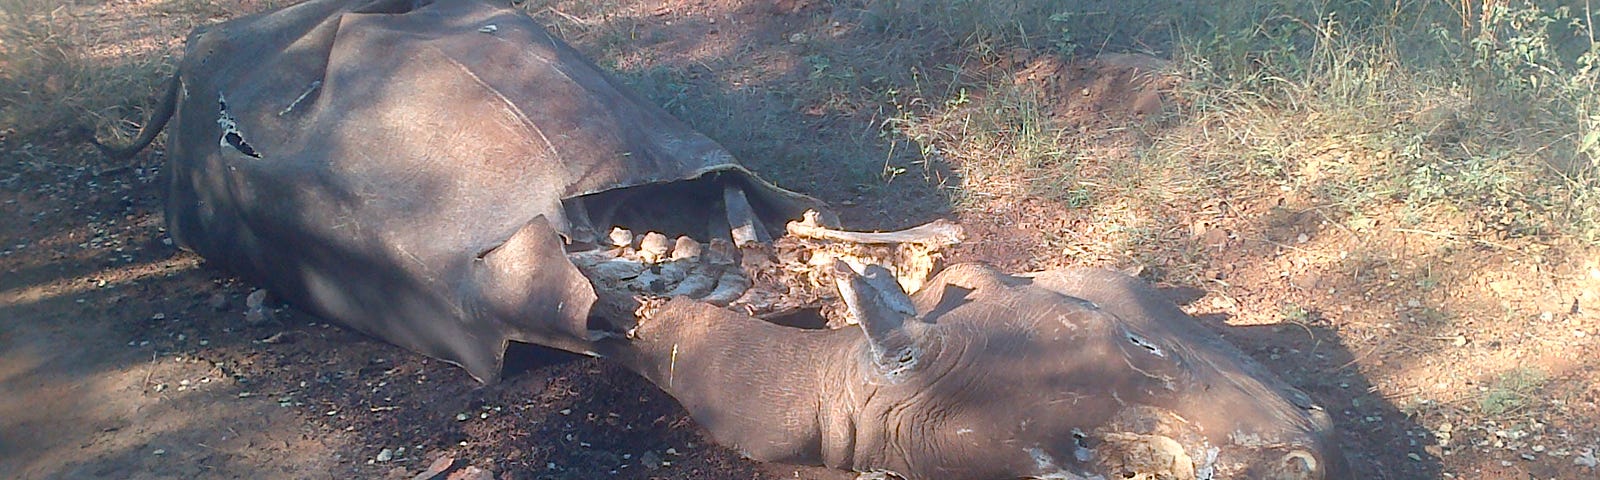 A carcass of a poached white rhino